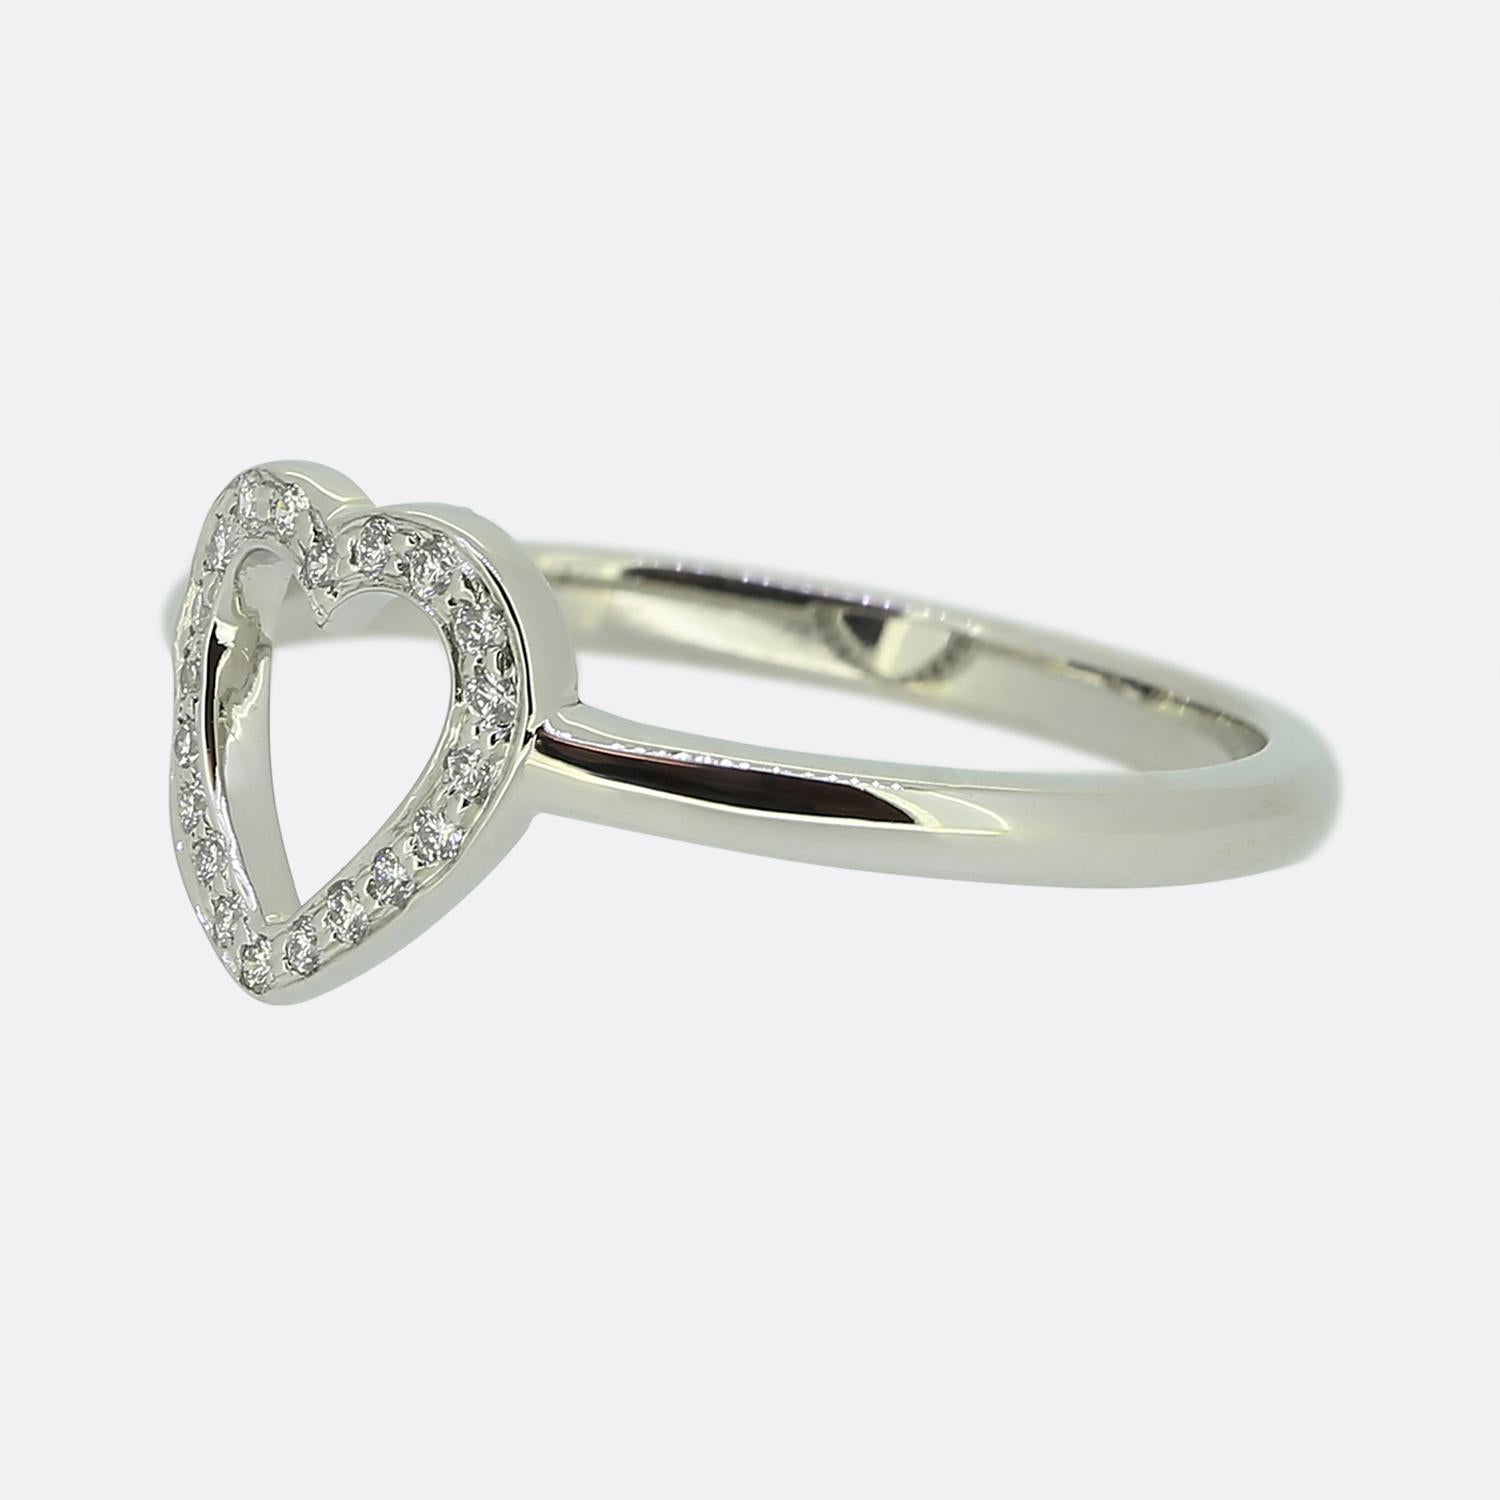 Here we have an iconic ring from the world renowned jewellery designer, Tiffany & Co. This piece has been crafted from platinum with the head taking on the shape of an open love heart adorned with 20 round brilliant cut diamonds. Completing the ring